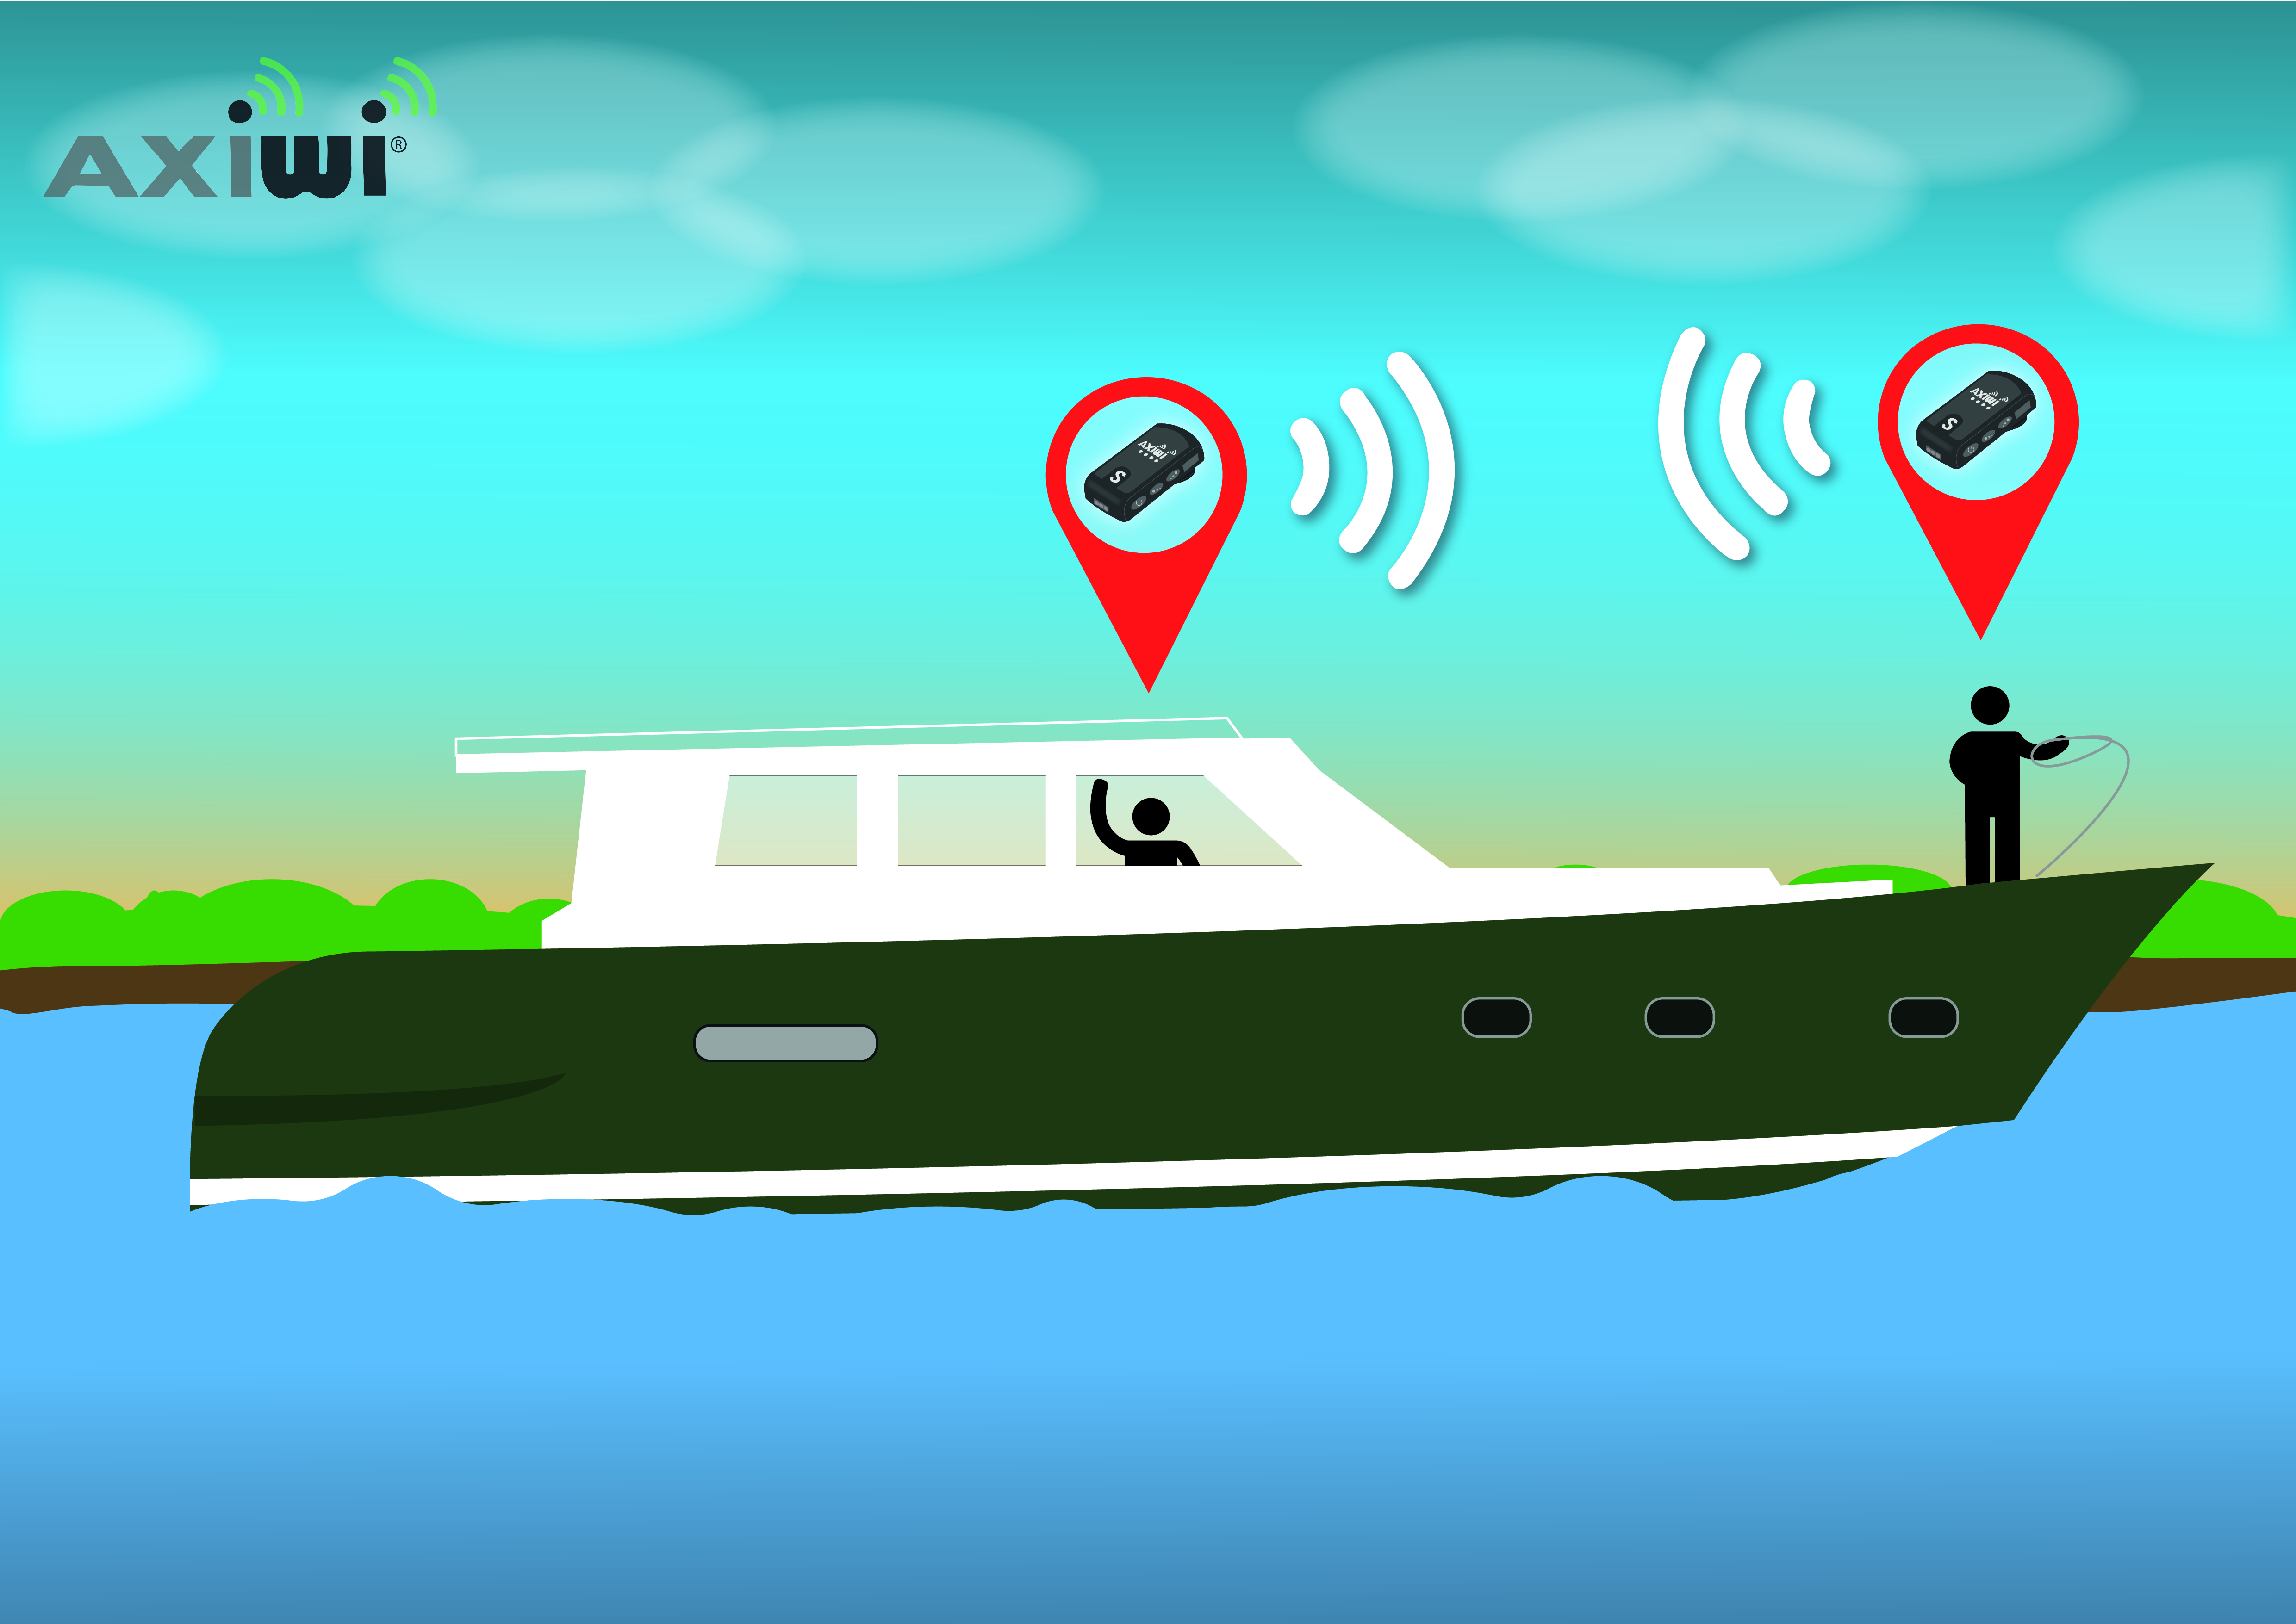 /wireless-communication-system-sailing-yacht-motorboat-axiwi